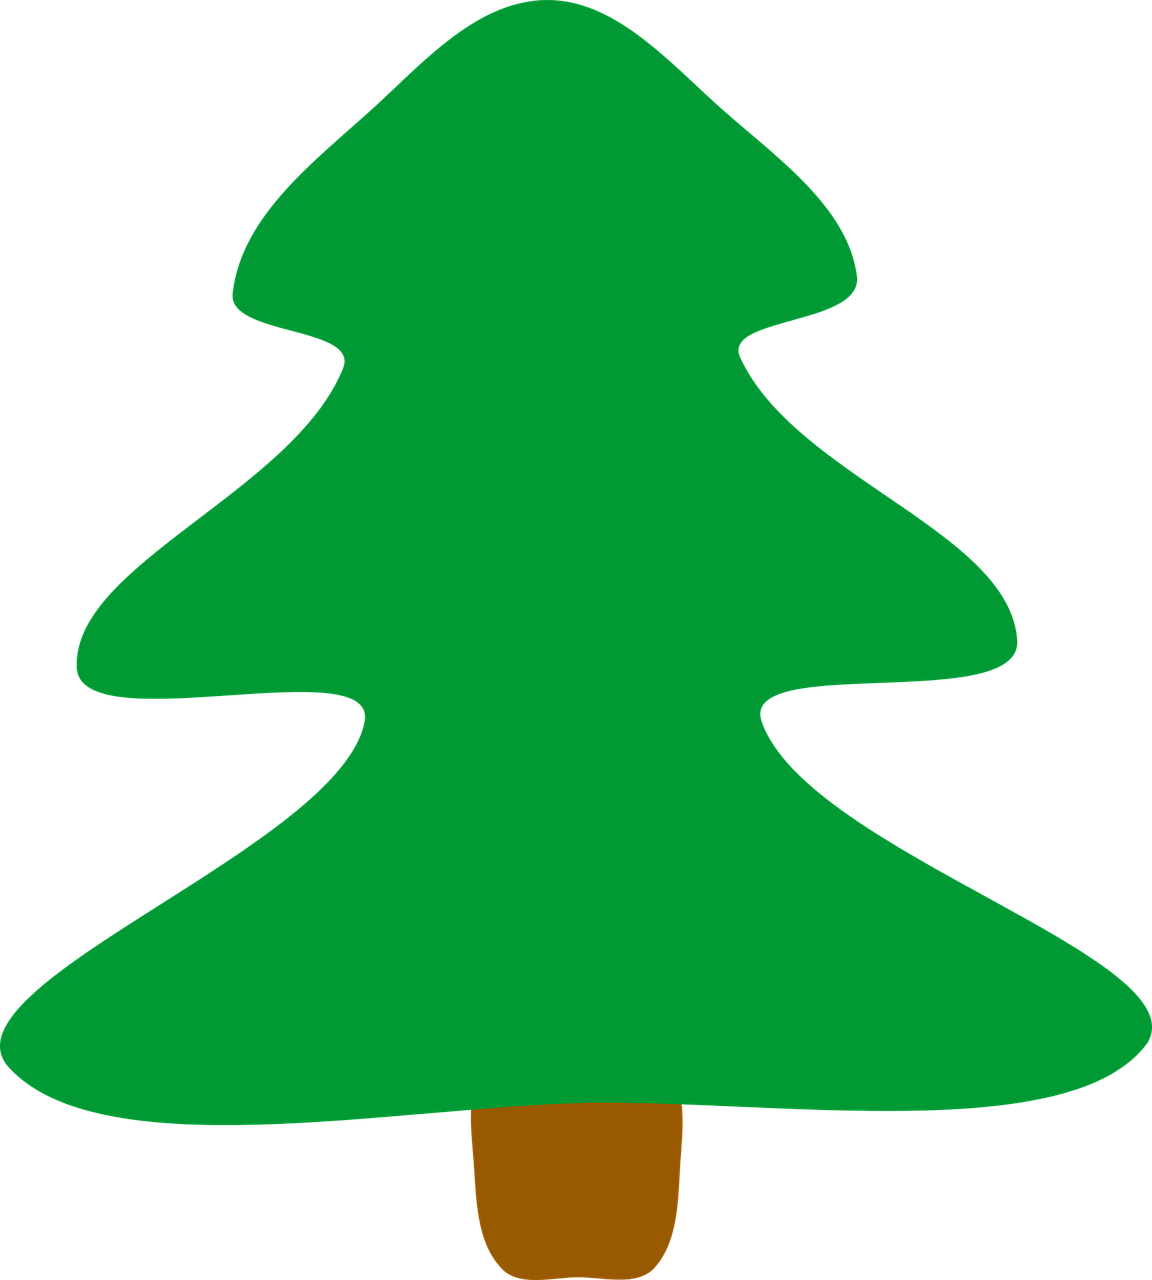 a green christmas tree on a black background, pixabay, folk art, simple cartoon, 1128x191 resolution, woods background, top - side view